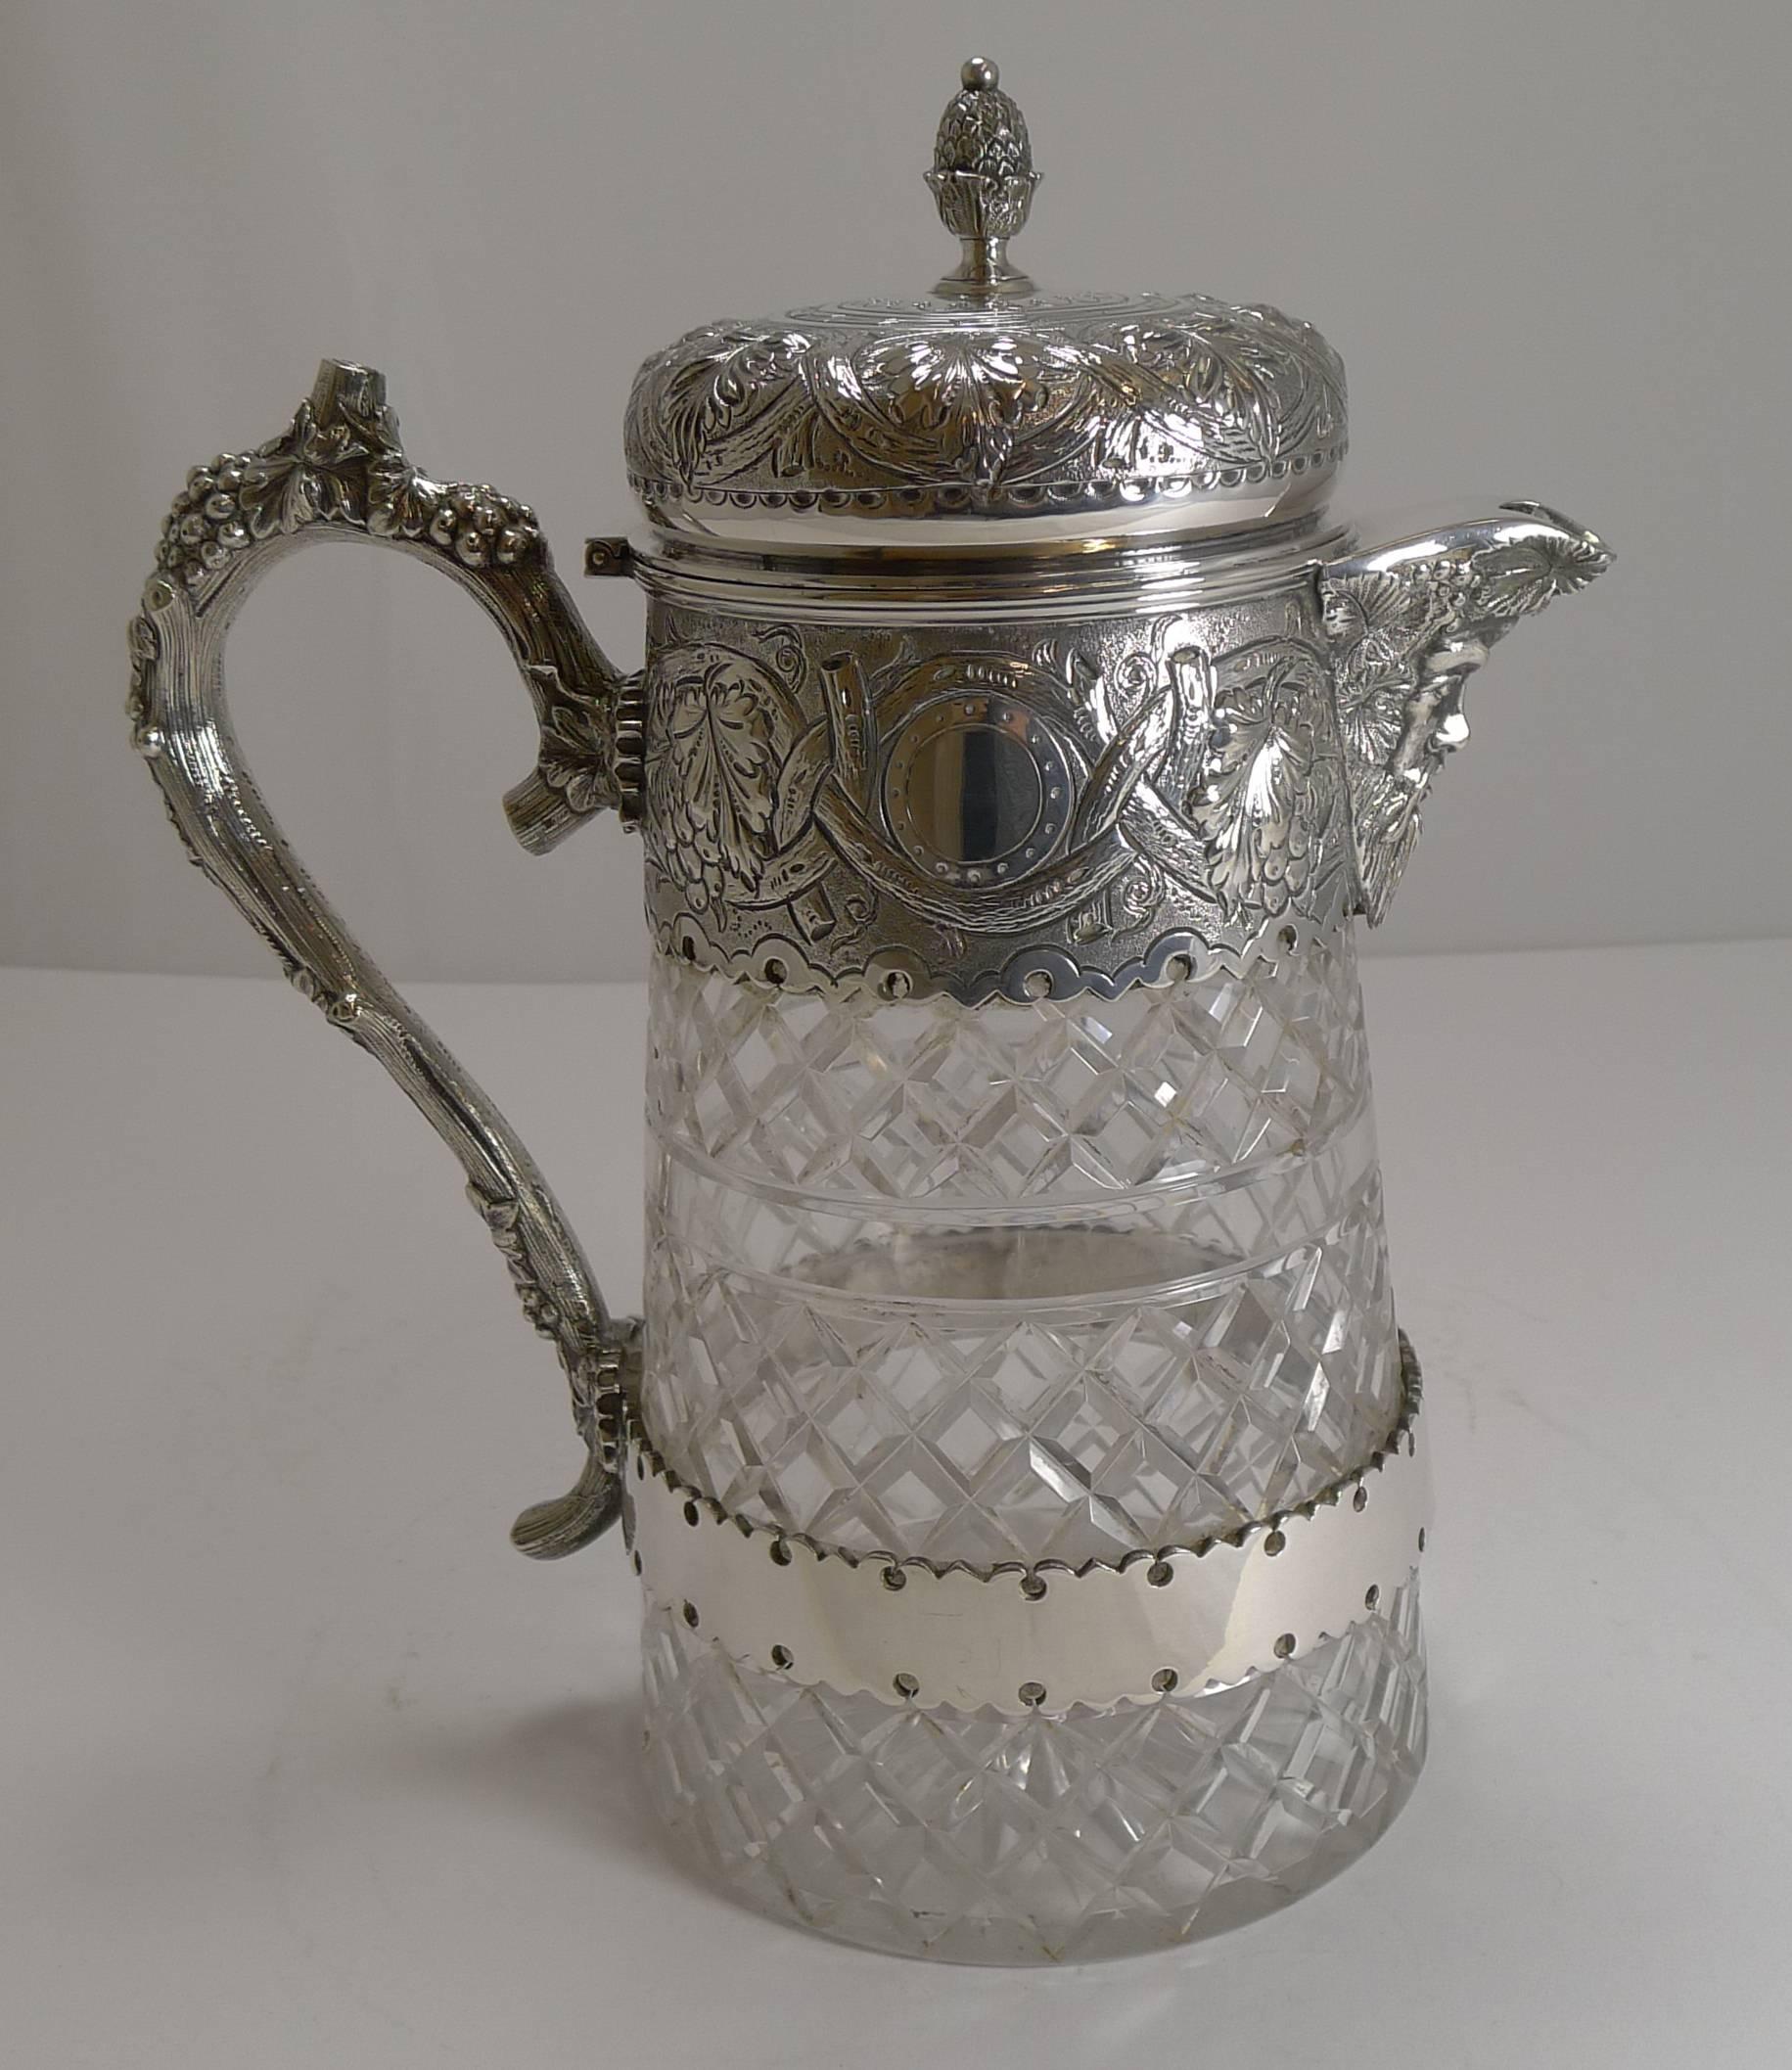 A magnificent large wine jug, wonderful quality made from a hefty piece of crystal beautifully hand-cut.

The naturalistic handle is just lovely, the collar and lid smothered with repousse or embossed Grapevine decoration. The wonderful figural